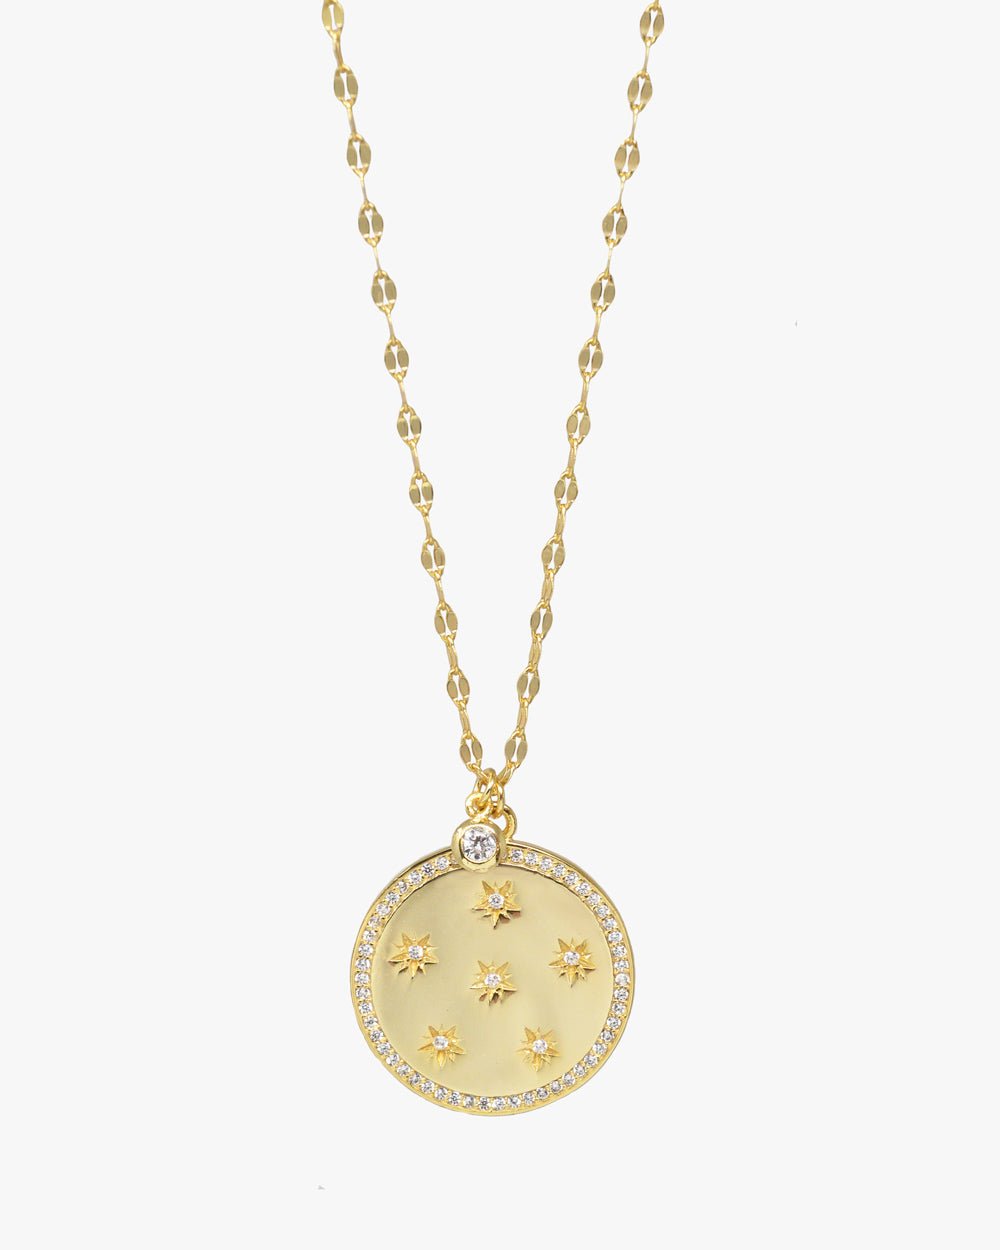 ZARA LONG CHAIN STAR PENDANT - Shop Cupcakes and Cashmere